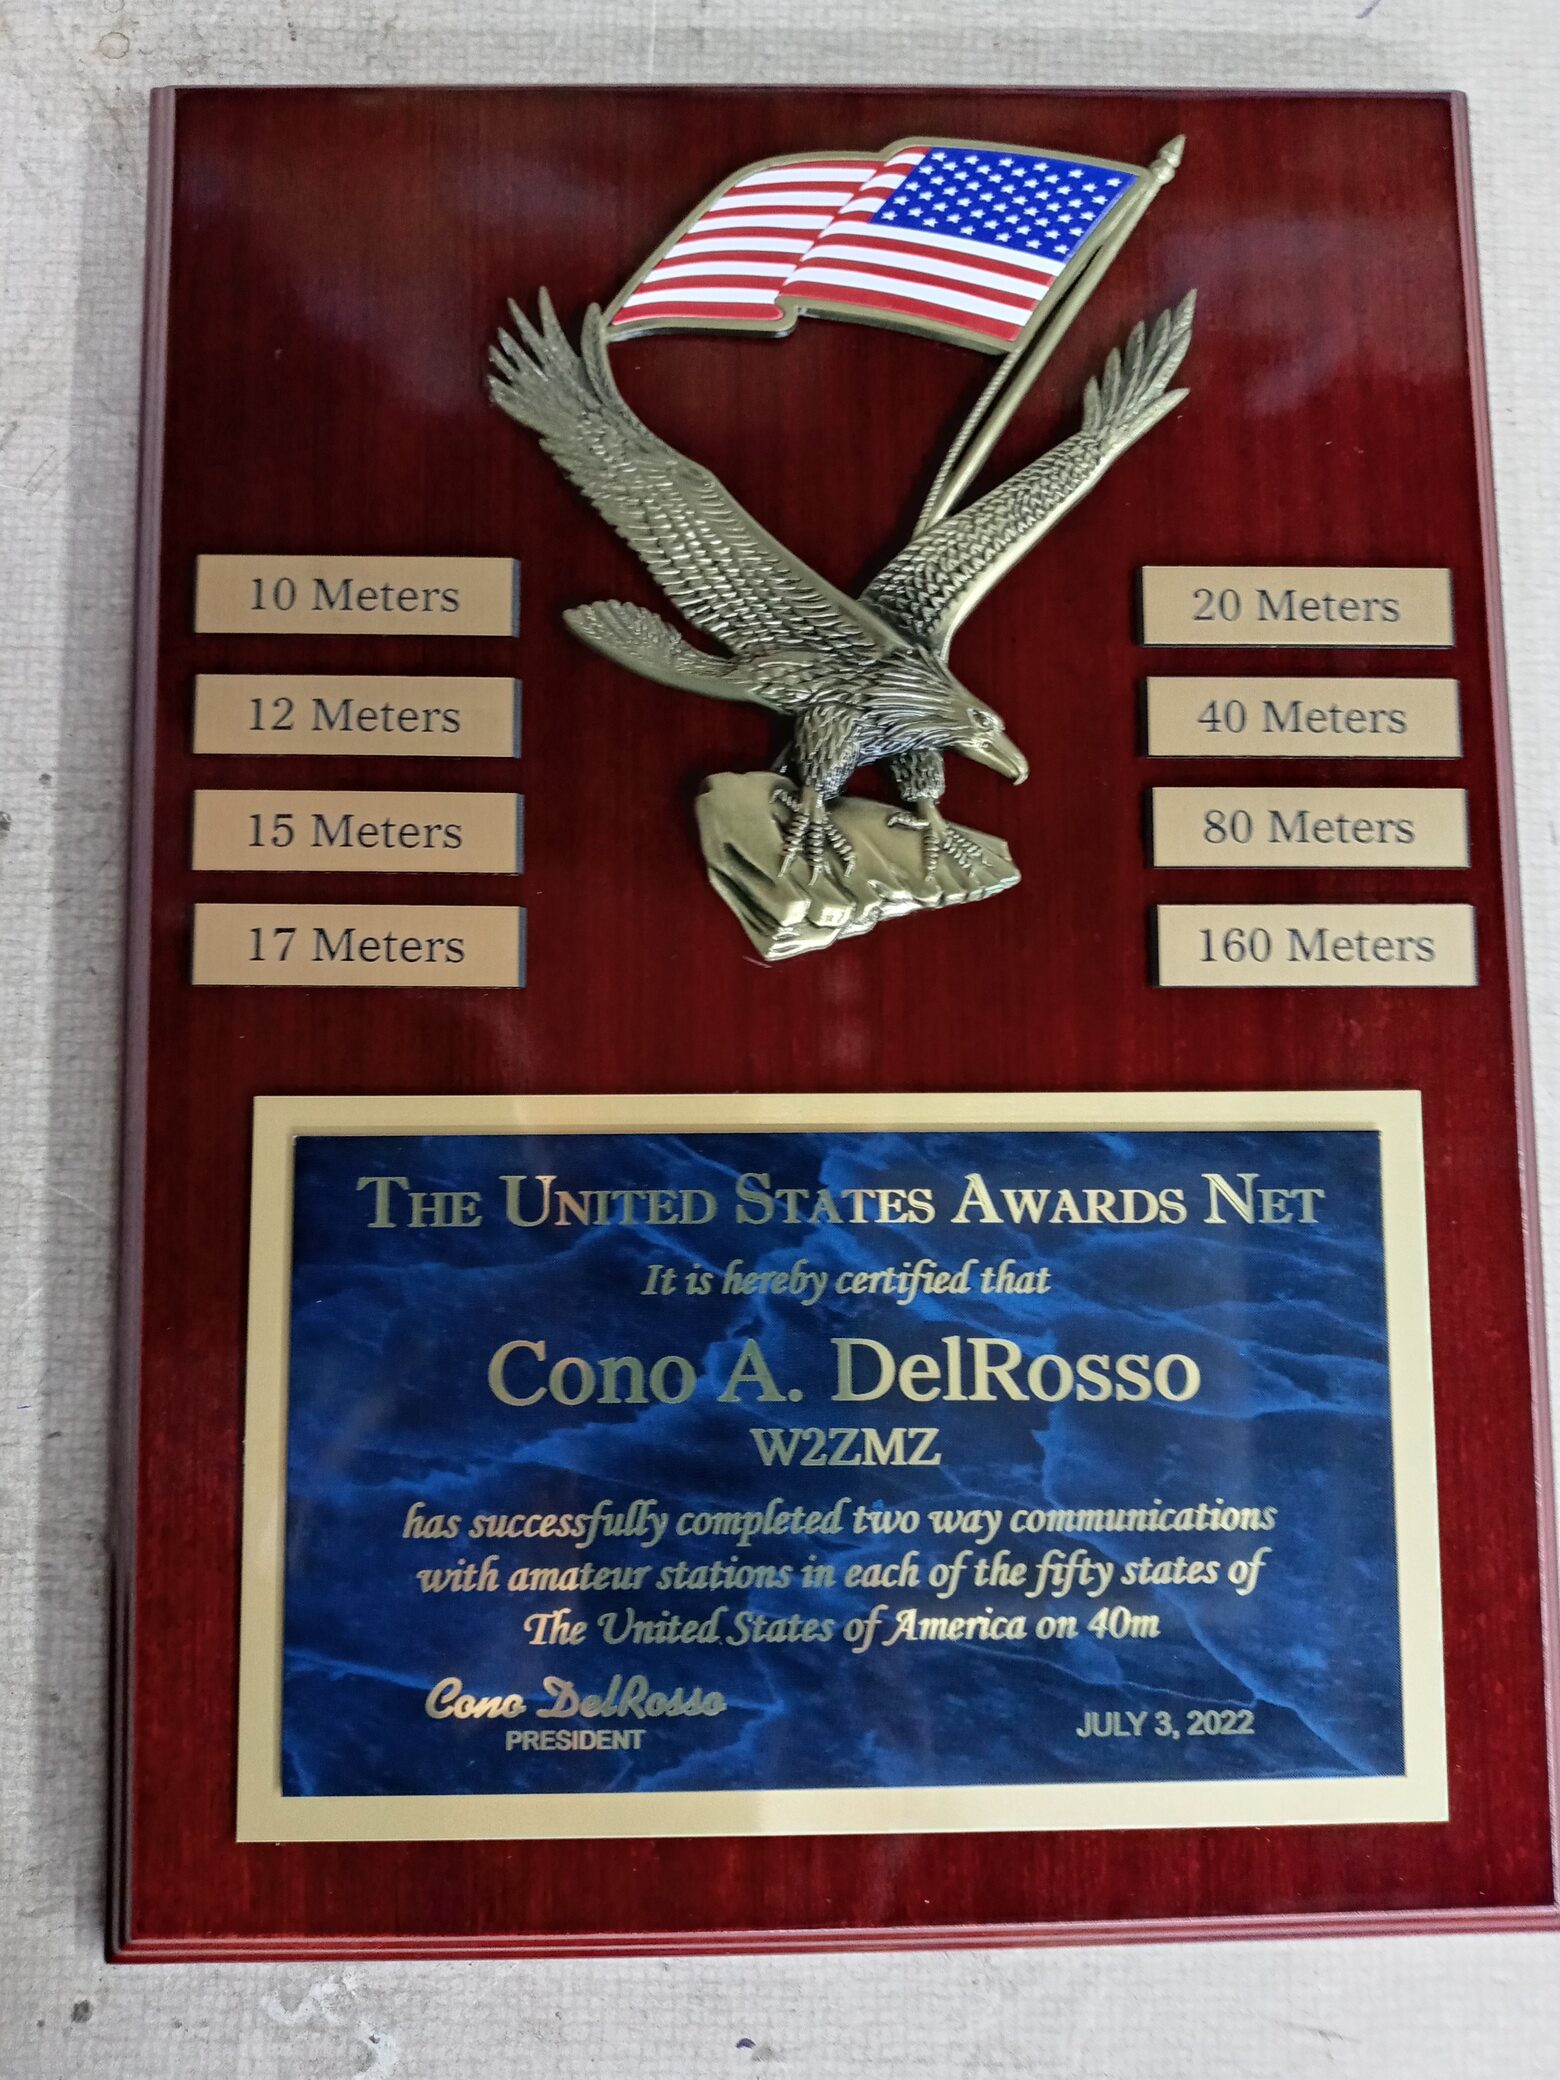 SAMPLE WAS 50 STATE AWARD PLAQUE WITH ENDORSEMENTS